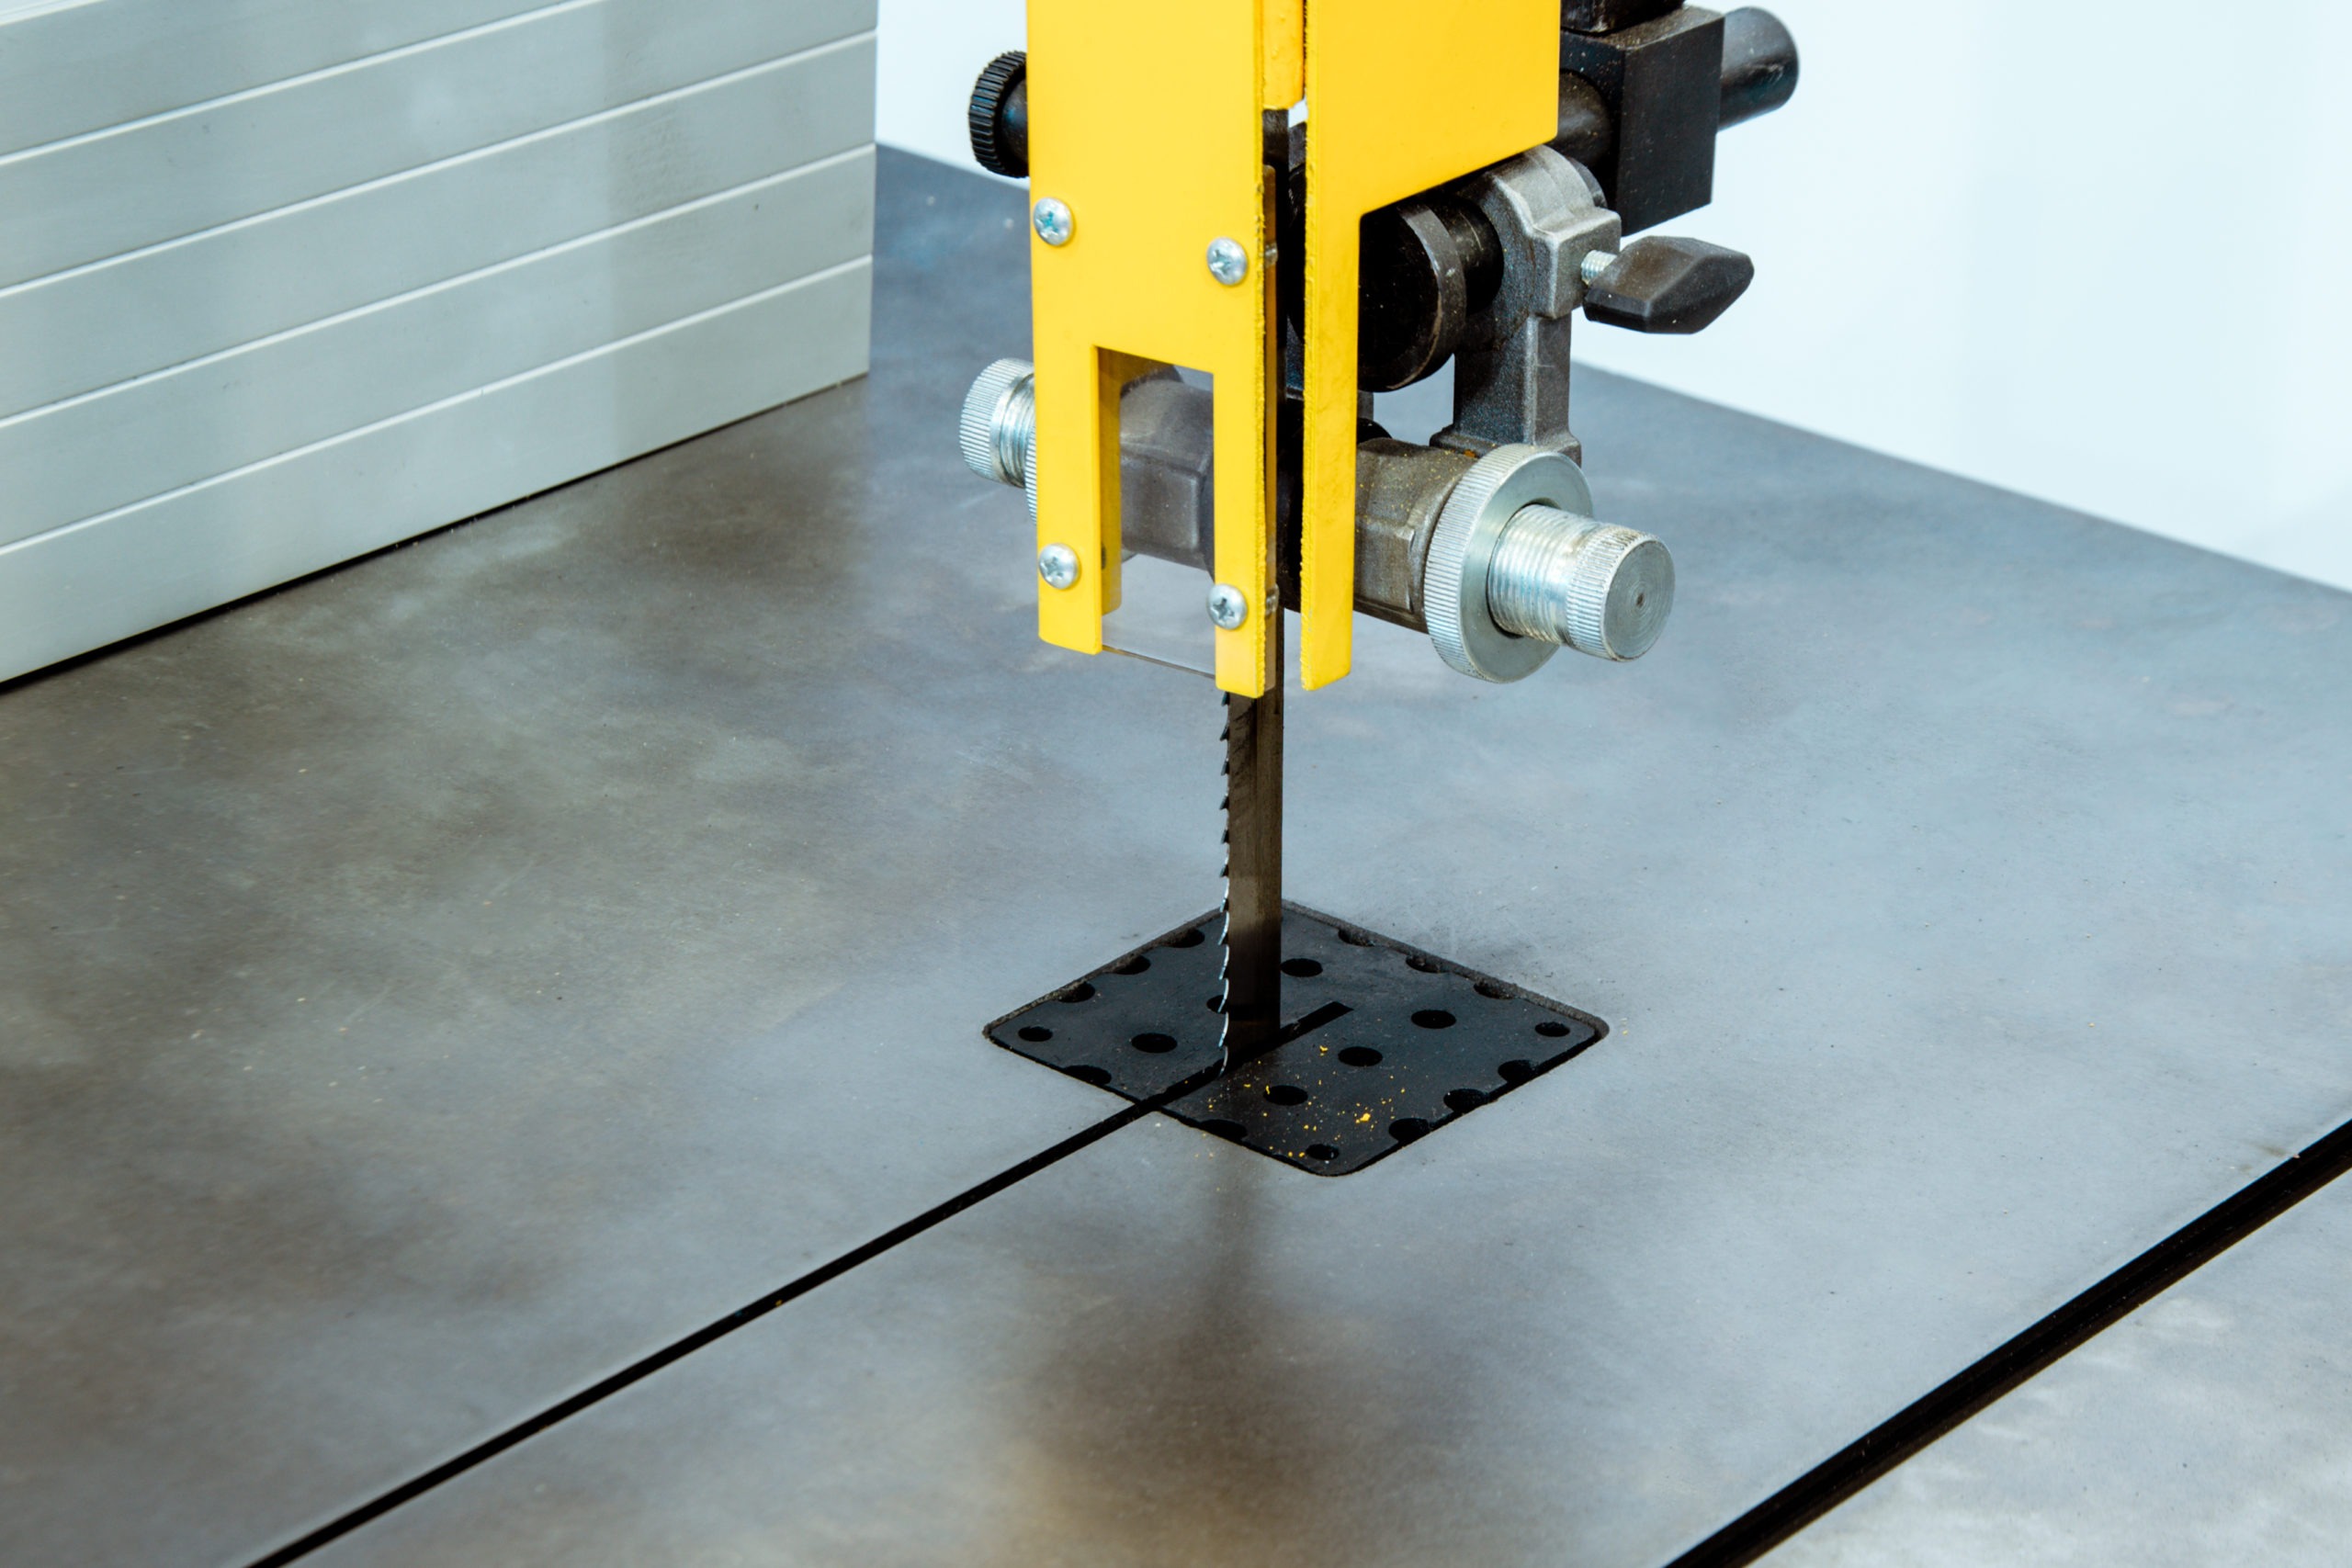 Working table of a vertical band saw.